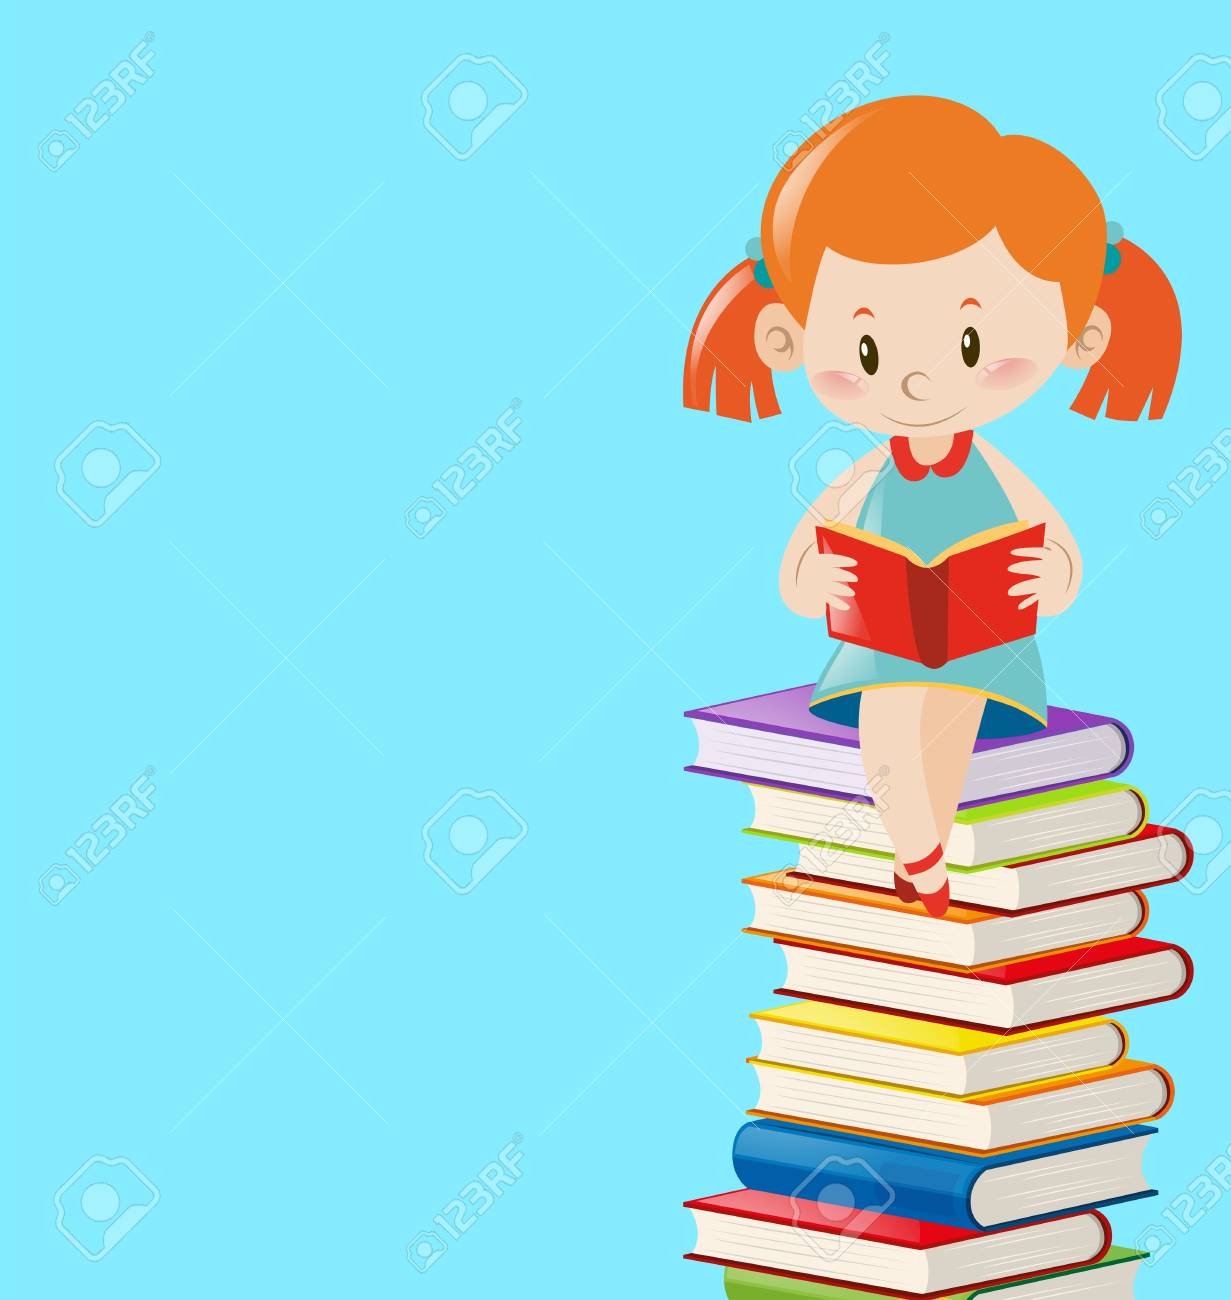 Background Template With Girl Reading Books Illustration Royalty